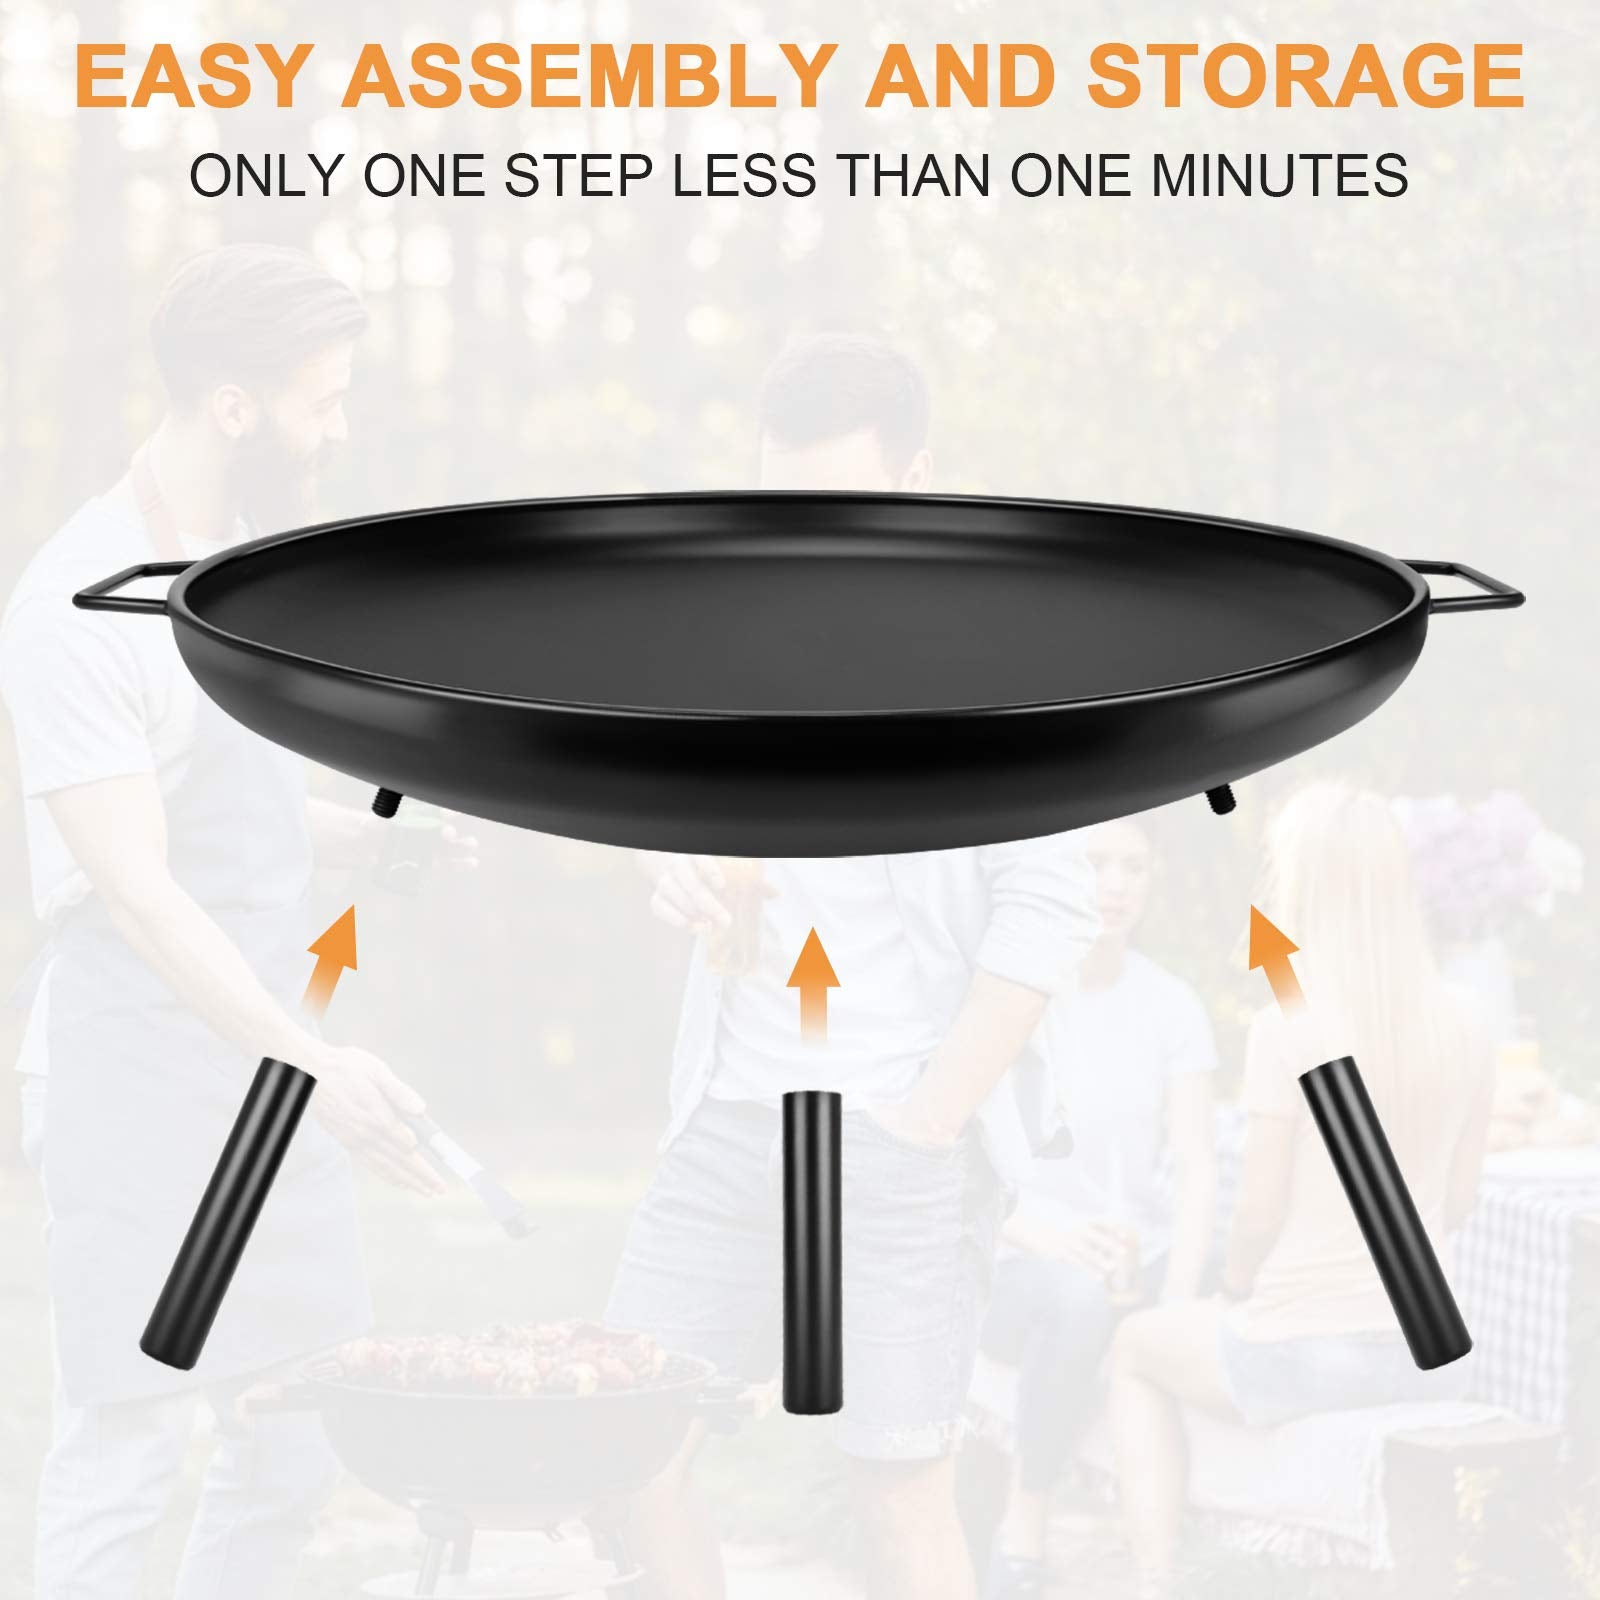 Outdoor Fire Pit Garden Patio Heater Charcoal Log Wood Burner Steel Fire Bowl For BBQ Camping Picnic